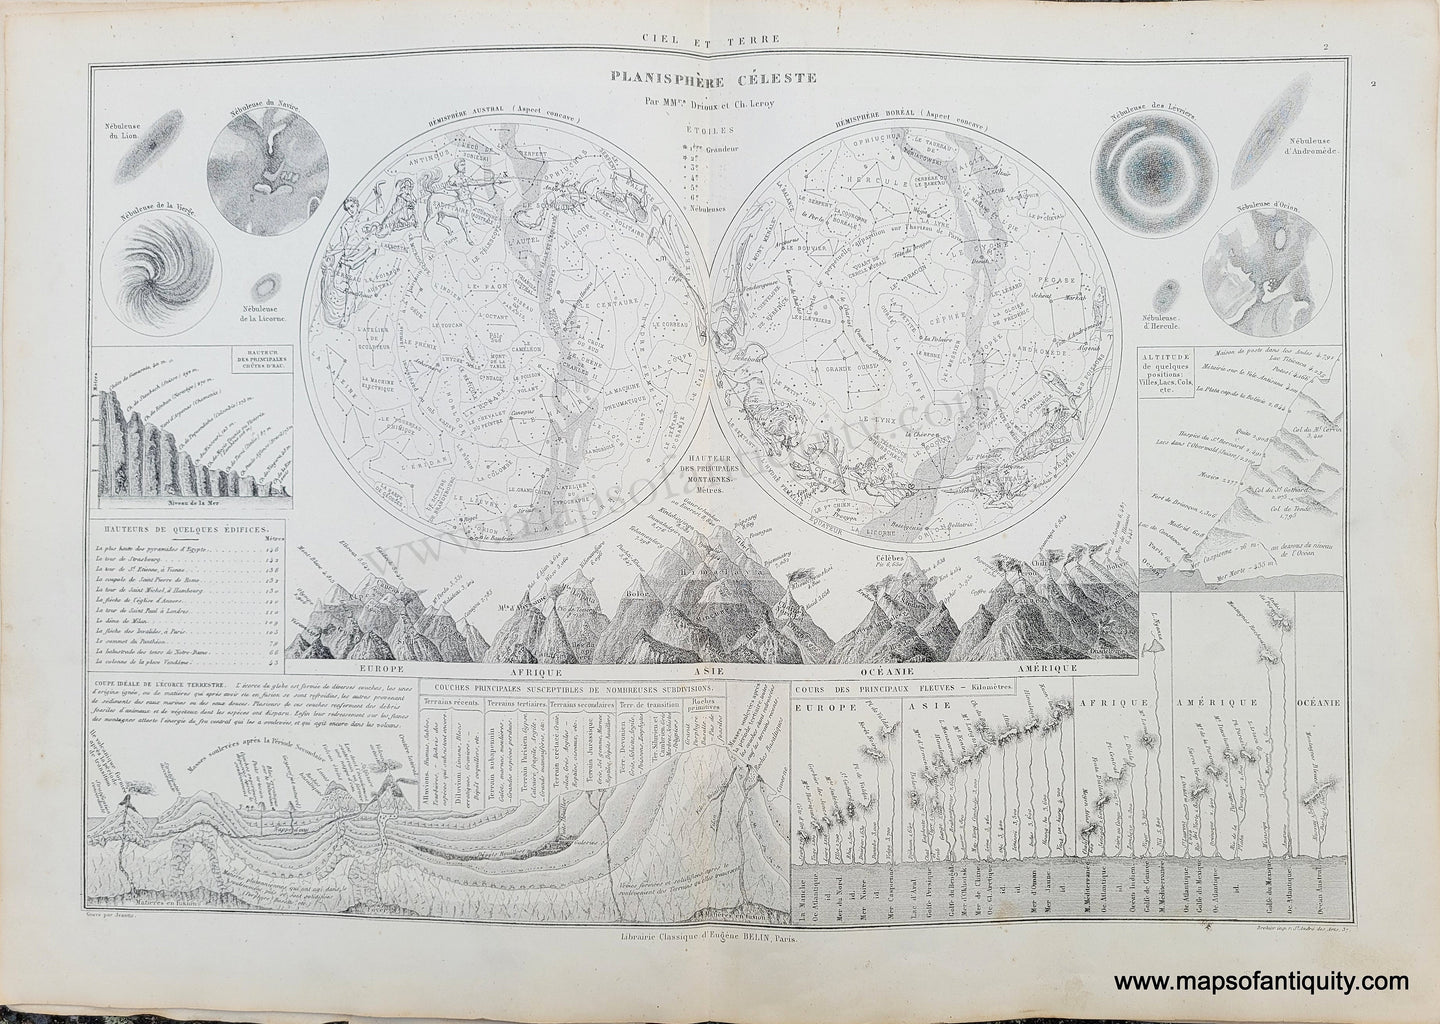 Genuine-Antique-Map-Astronomy-with-comparative-heights-of-Mountains-and-Lengths-of-Rivers---Ciel-et-Terre-1875-Drioux-&-Leroy-CEL130-Maps-Of-Antiquity